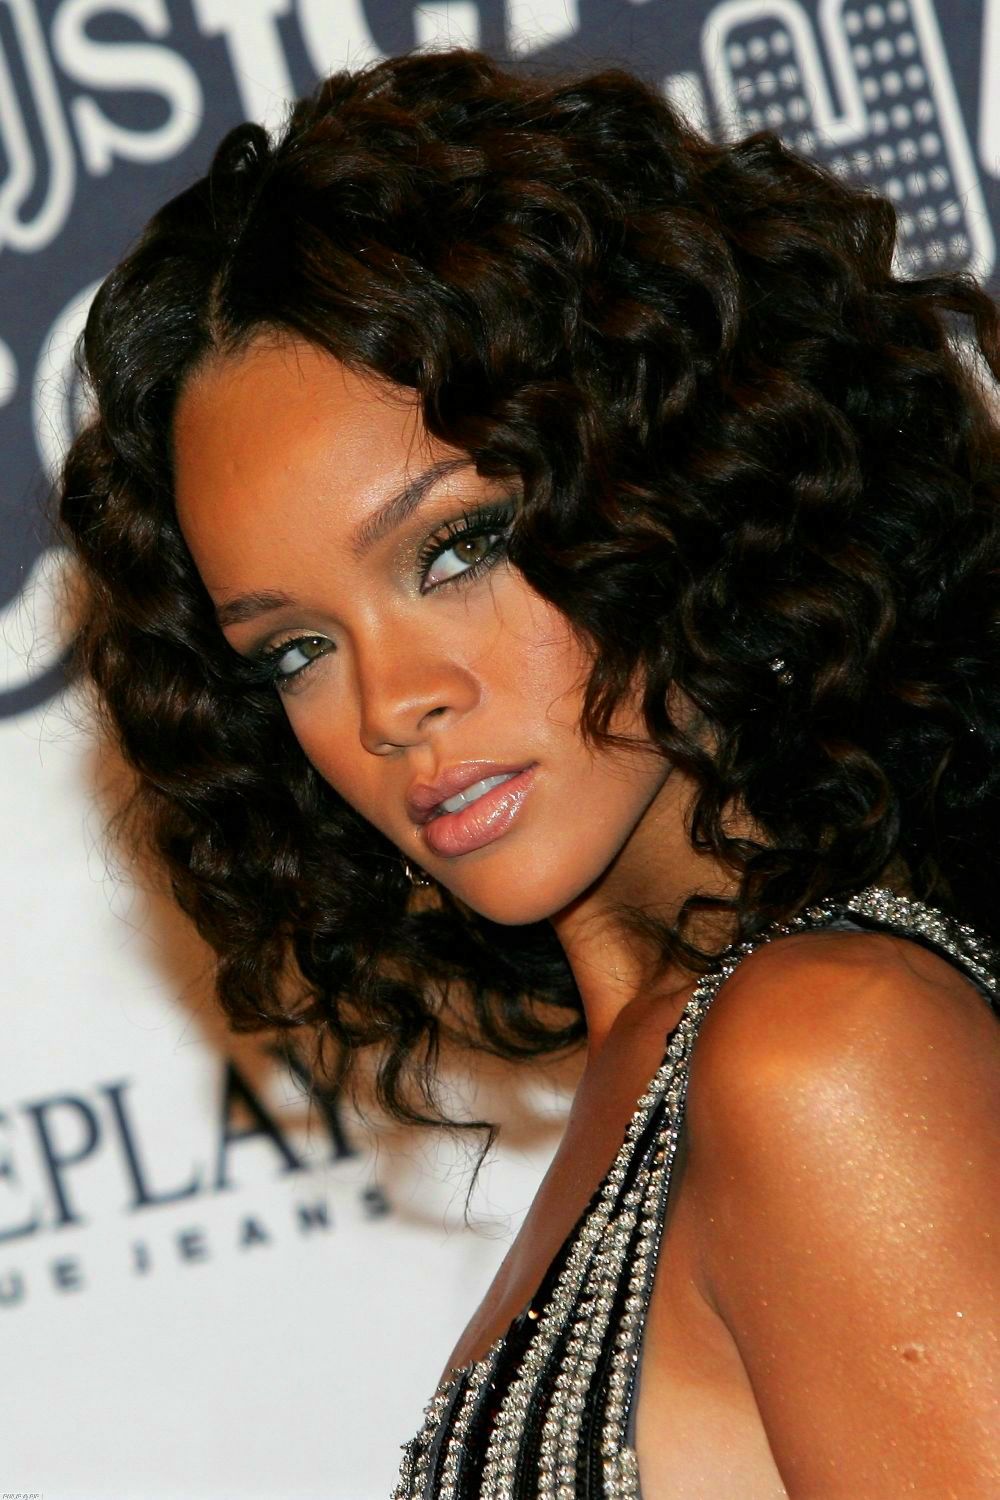 meget dyd forvirring FentyStats on Twitter: "2006: Rihanna scored her first #1 hit less than a  year into her career. Her sophomore album doubled the sales of her debut  and scored triple the amount of